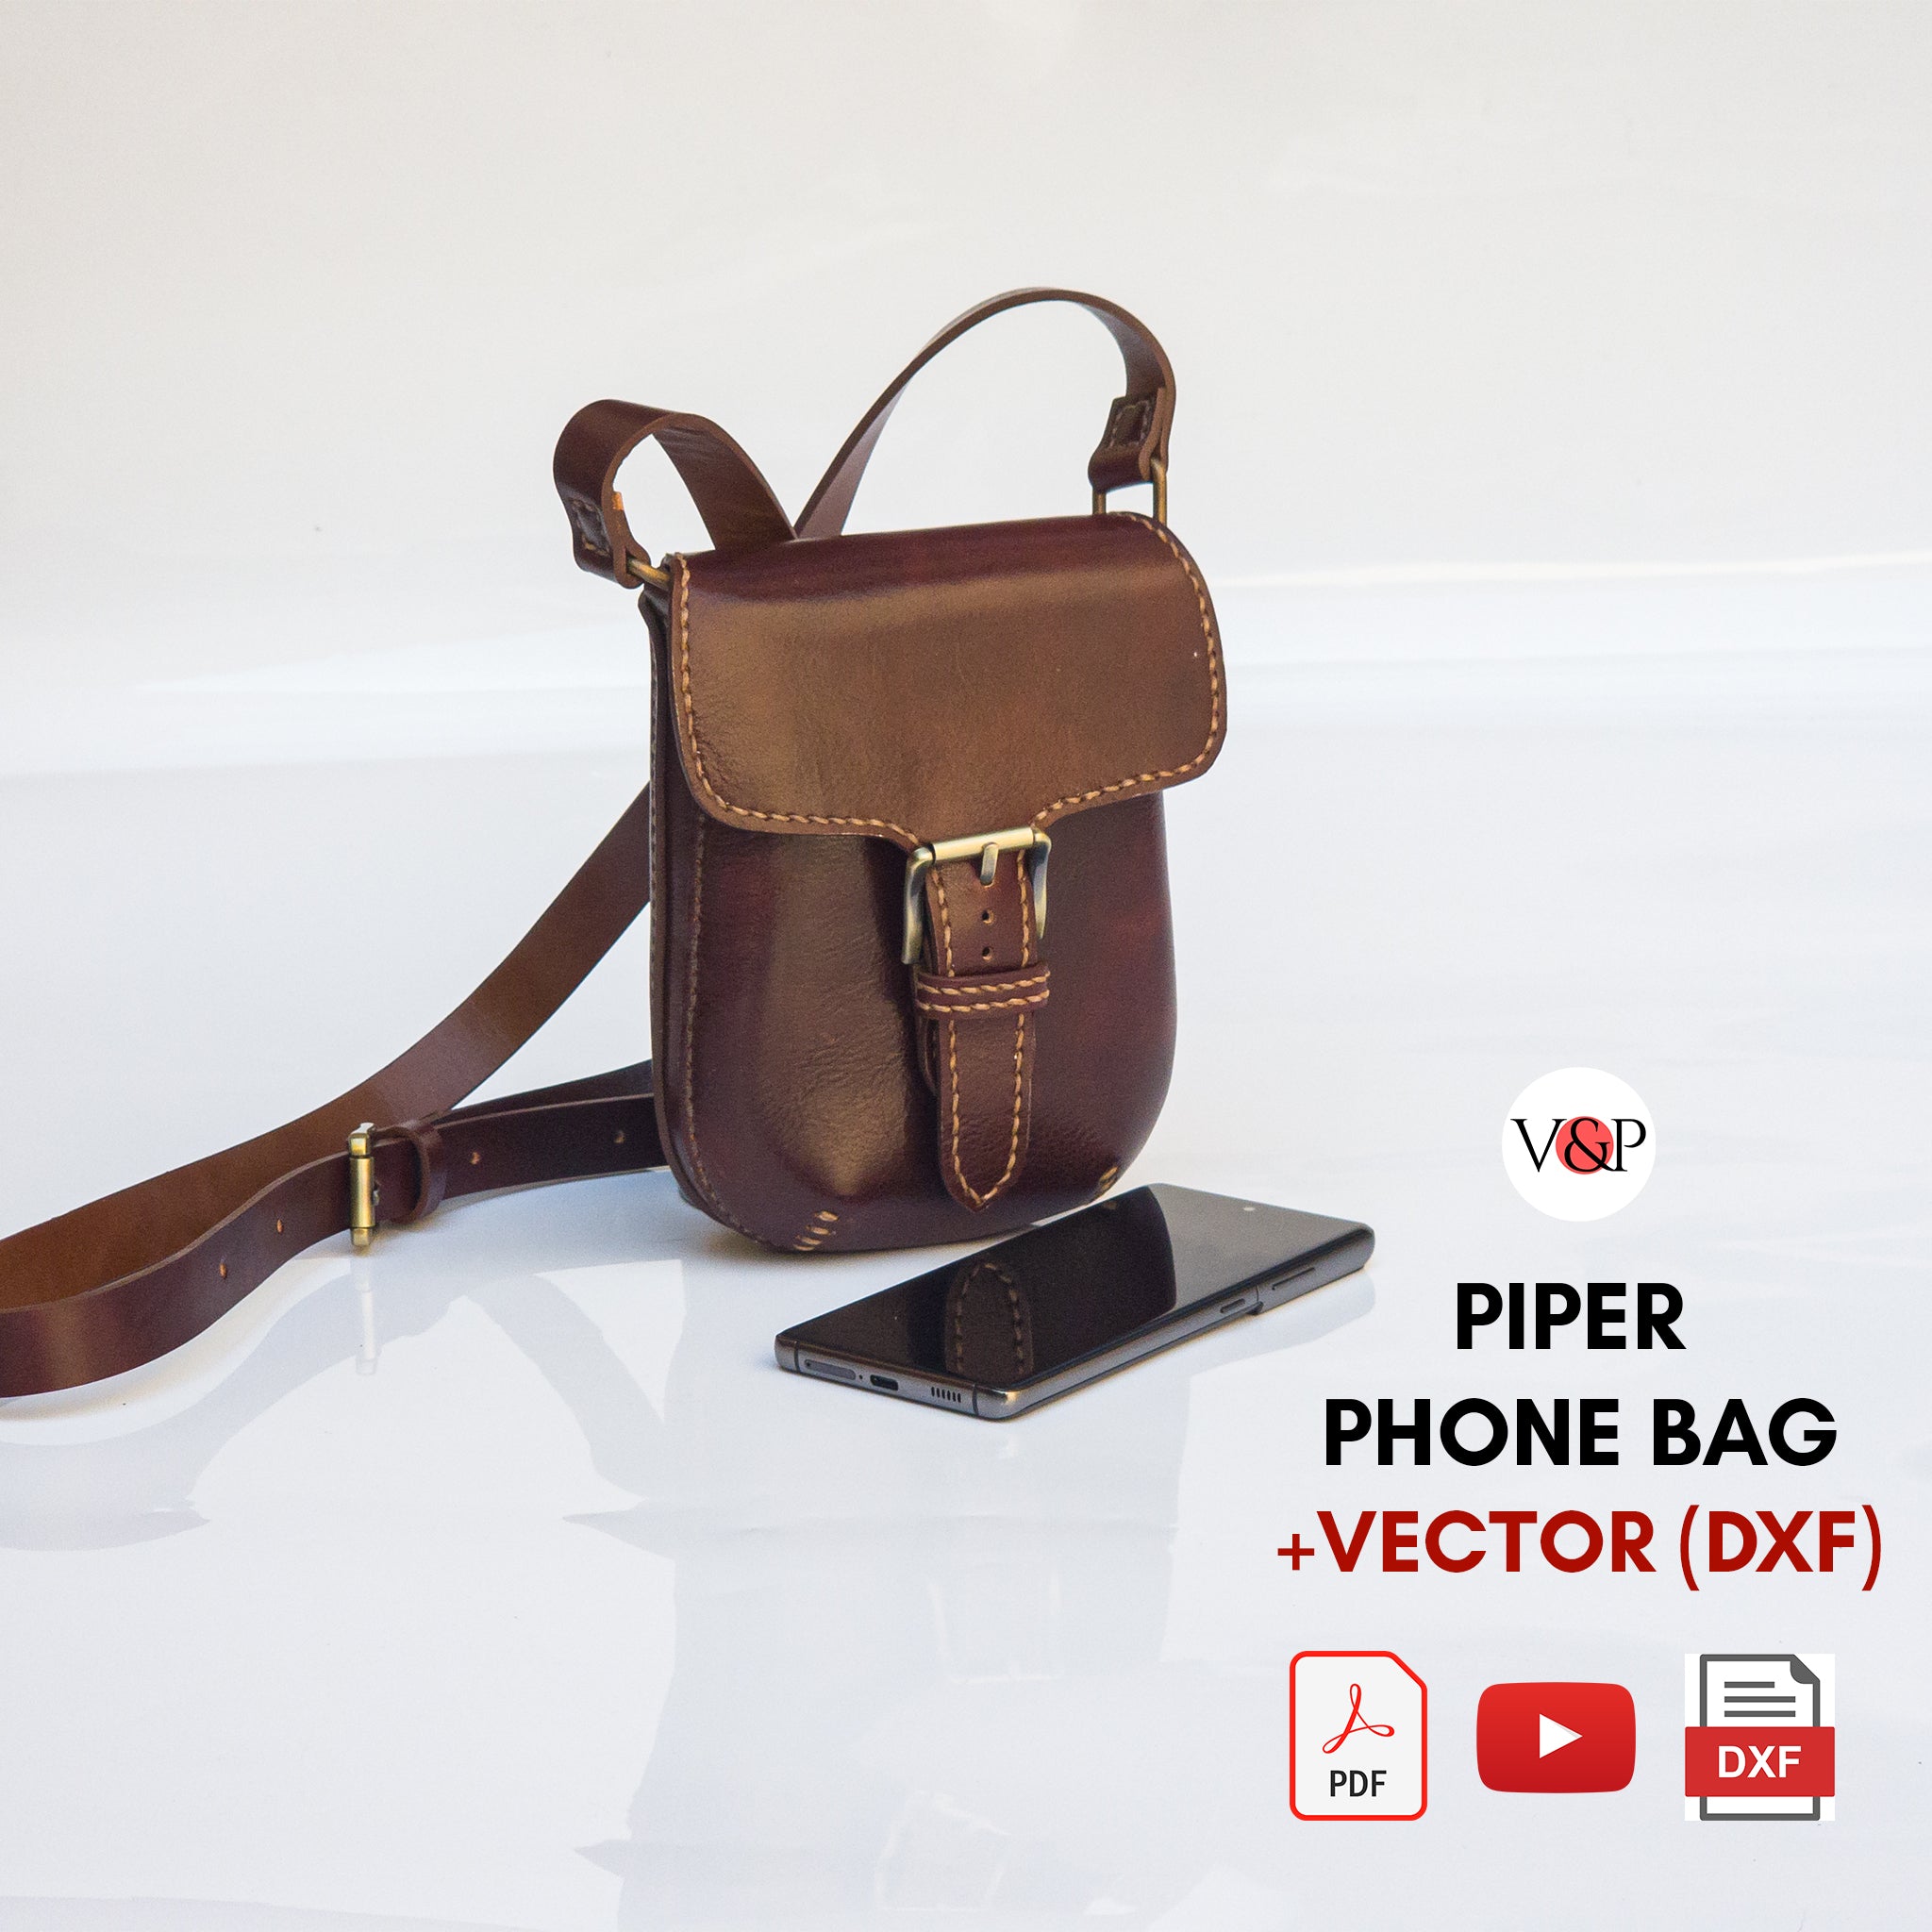 PDF Pattern and DXF File for Laser Cut, Instructional Video for Piper Phone Bag - Vasile and Pavel Leather Patterns